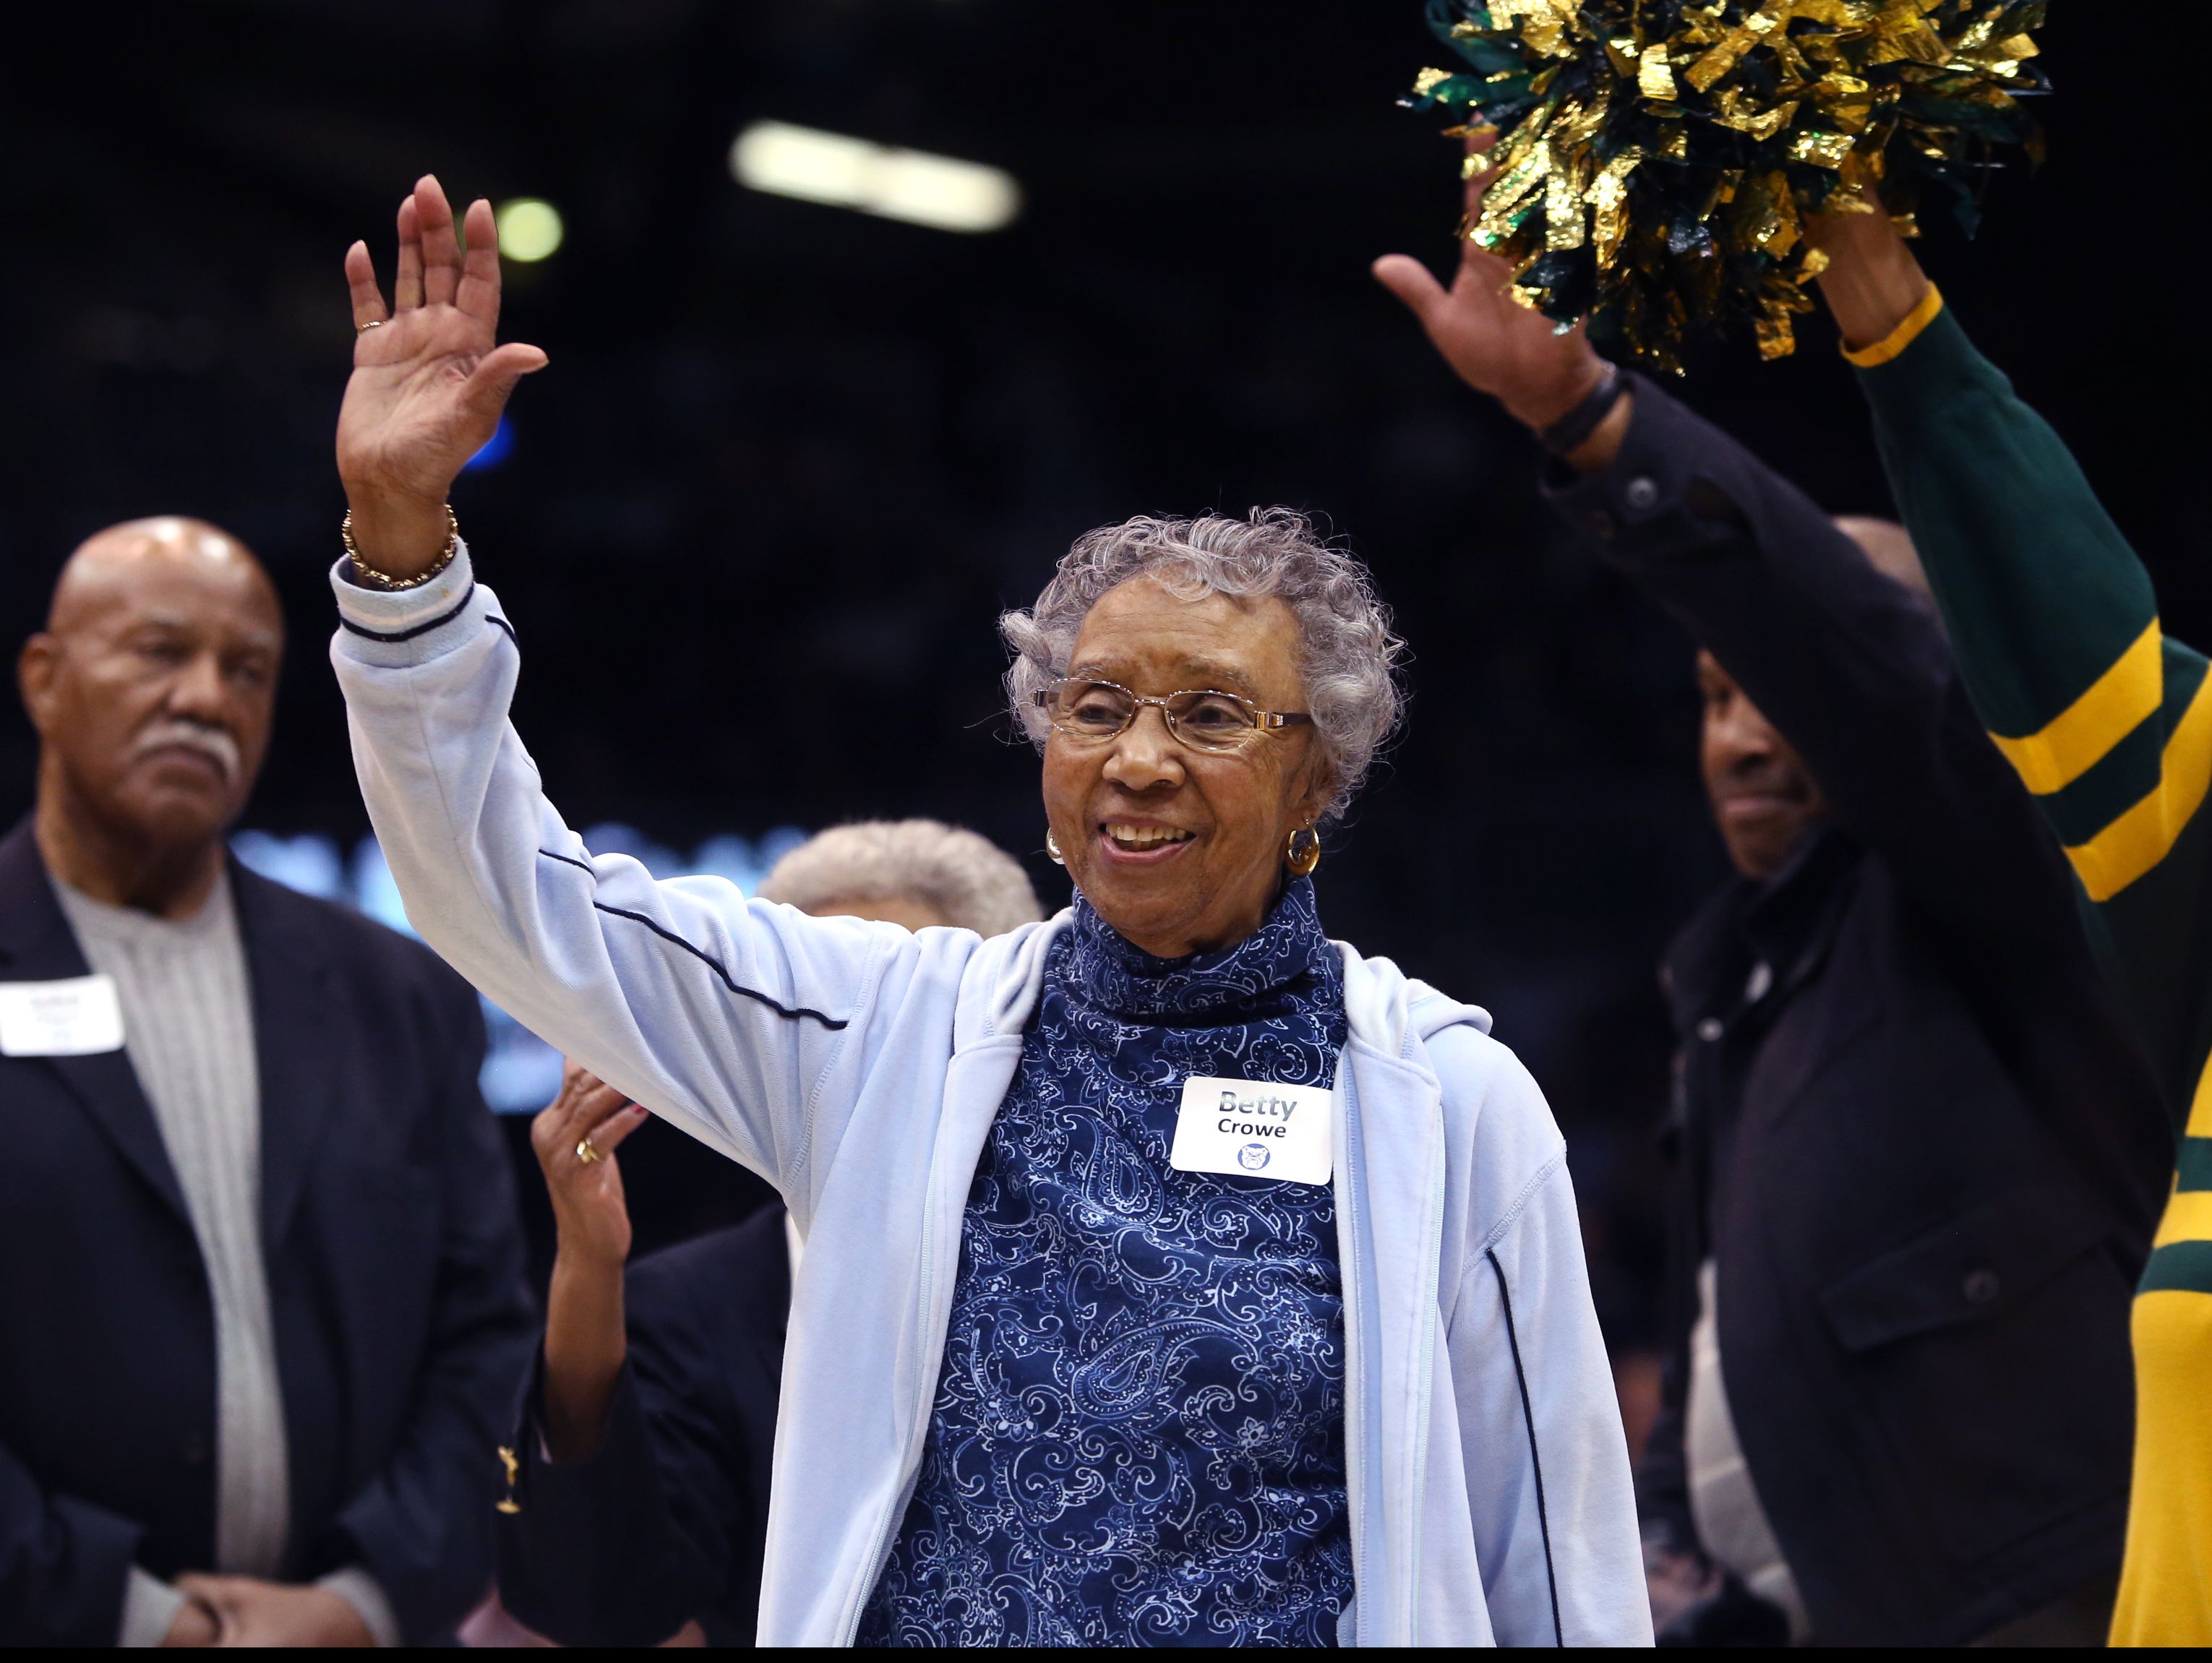 Betty Crowe, widow of Ray Crowe, the coach of the 1955-56 Crispus Attucks High School teams that won the Indiana state high school basketball championships, is introduced during a 60th anniversary tribute to the teams during a time out at the Butler-Marquette game at Hinkle Fieldhouse in Indianapolis on Wednesday, Feb. 25, 2015.